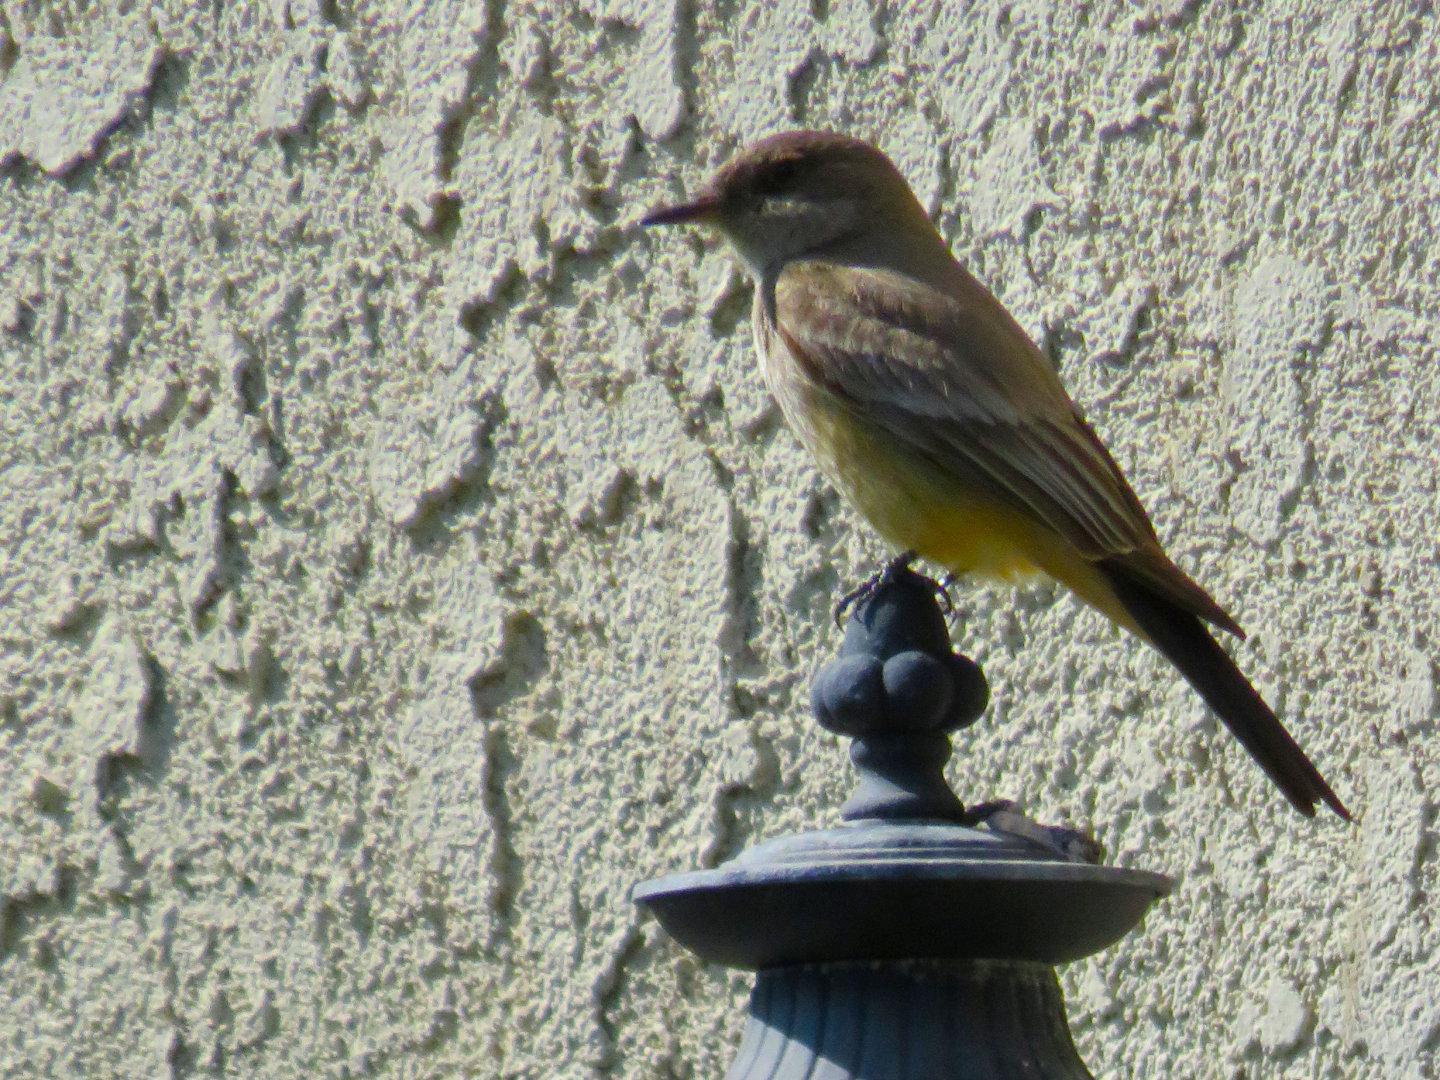 Say's Phoebe perched on an outdoor lamp.